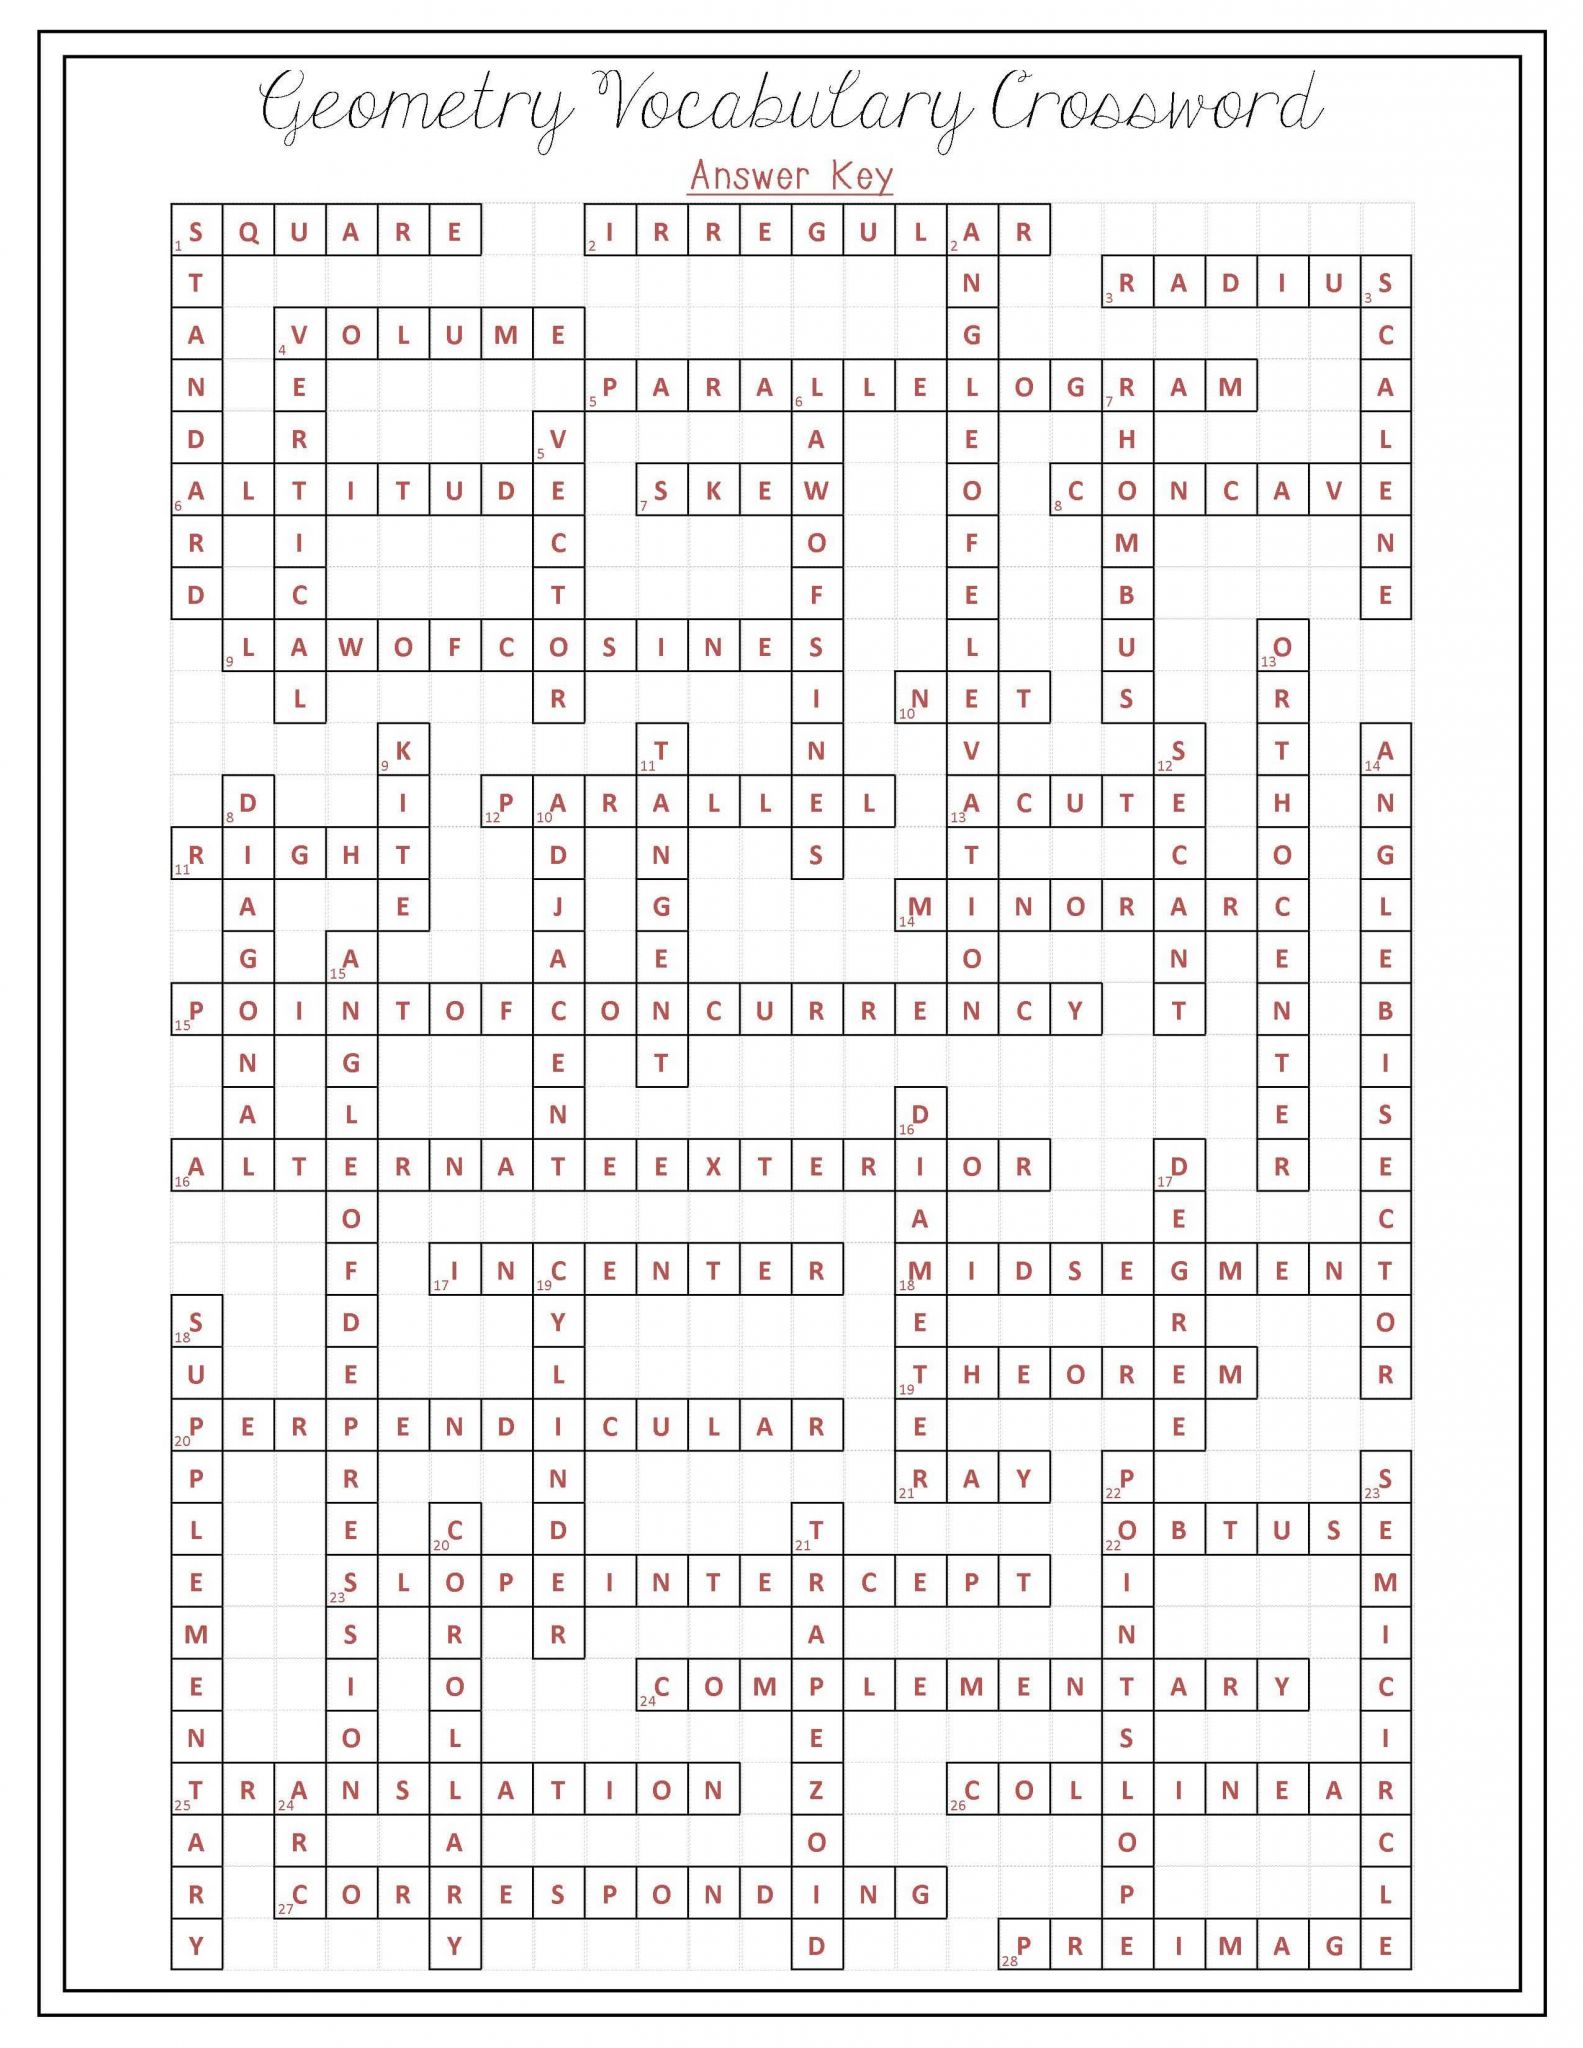 Geometric Sequence Worksheet as Well as Geometry Vocabulary Crossword